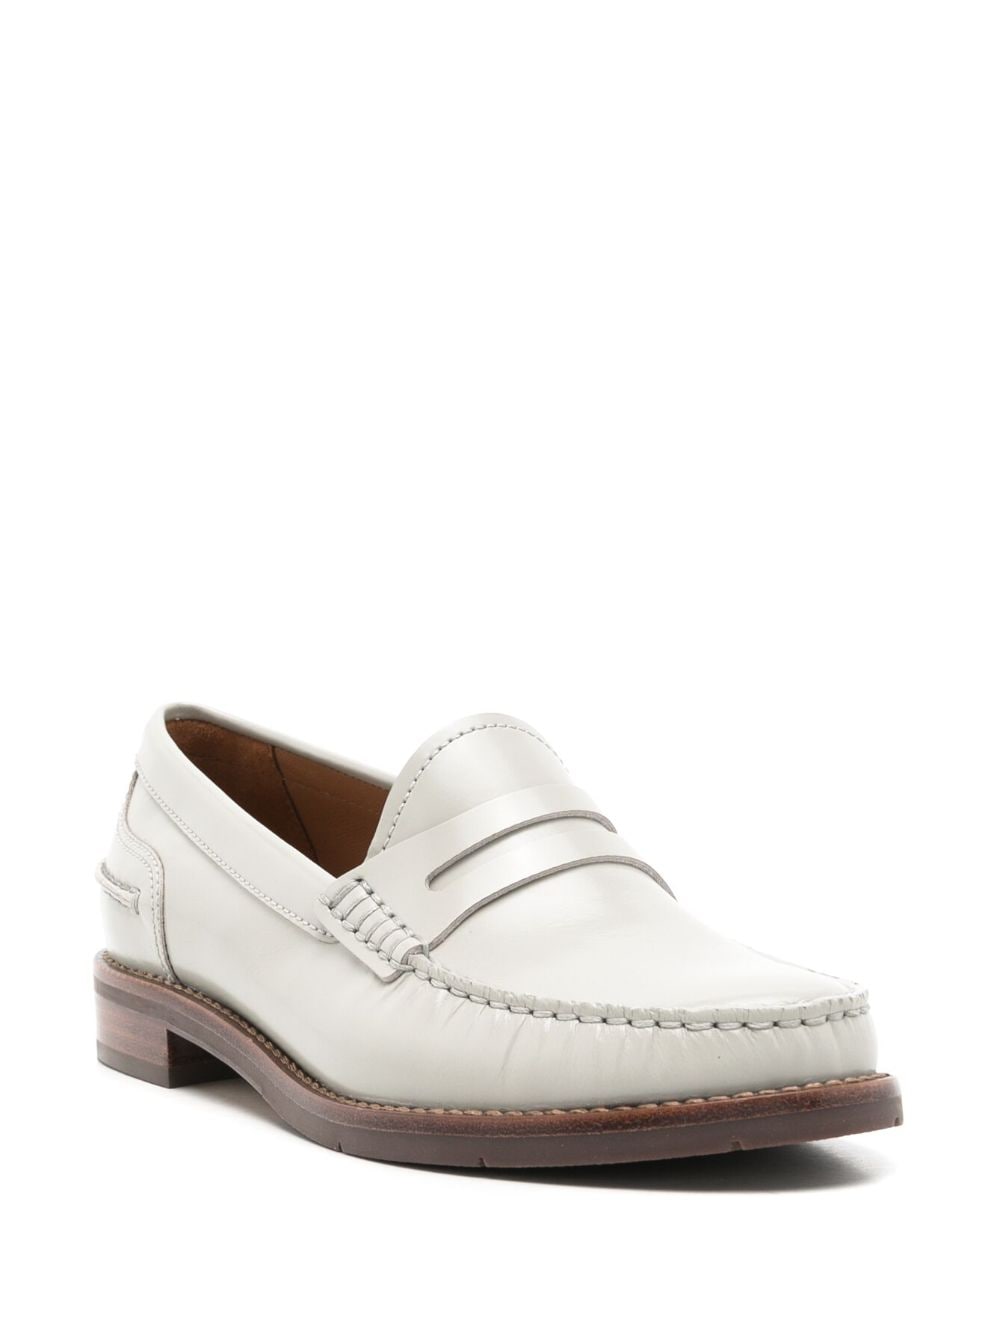 Shop Sarah Chofakian Rive Gauche Leather Loafers In Grey